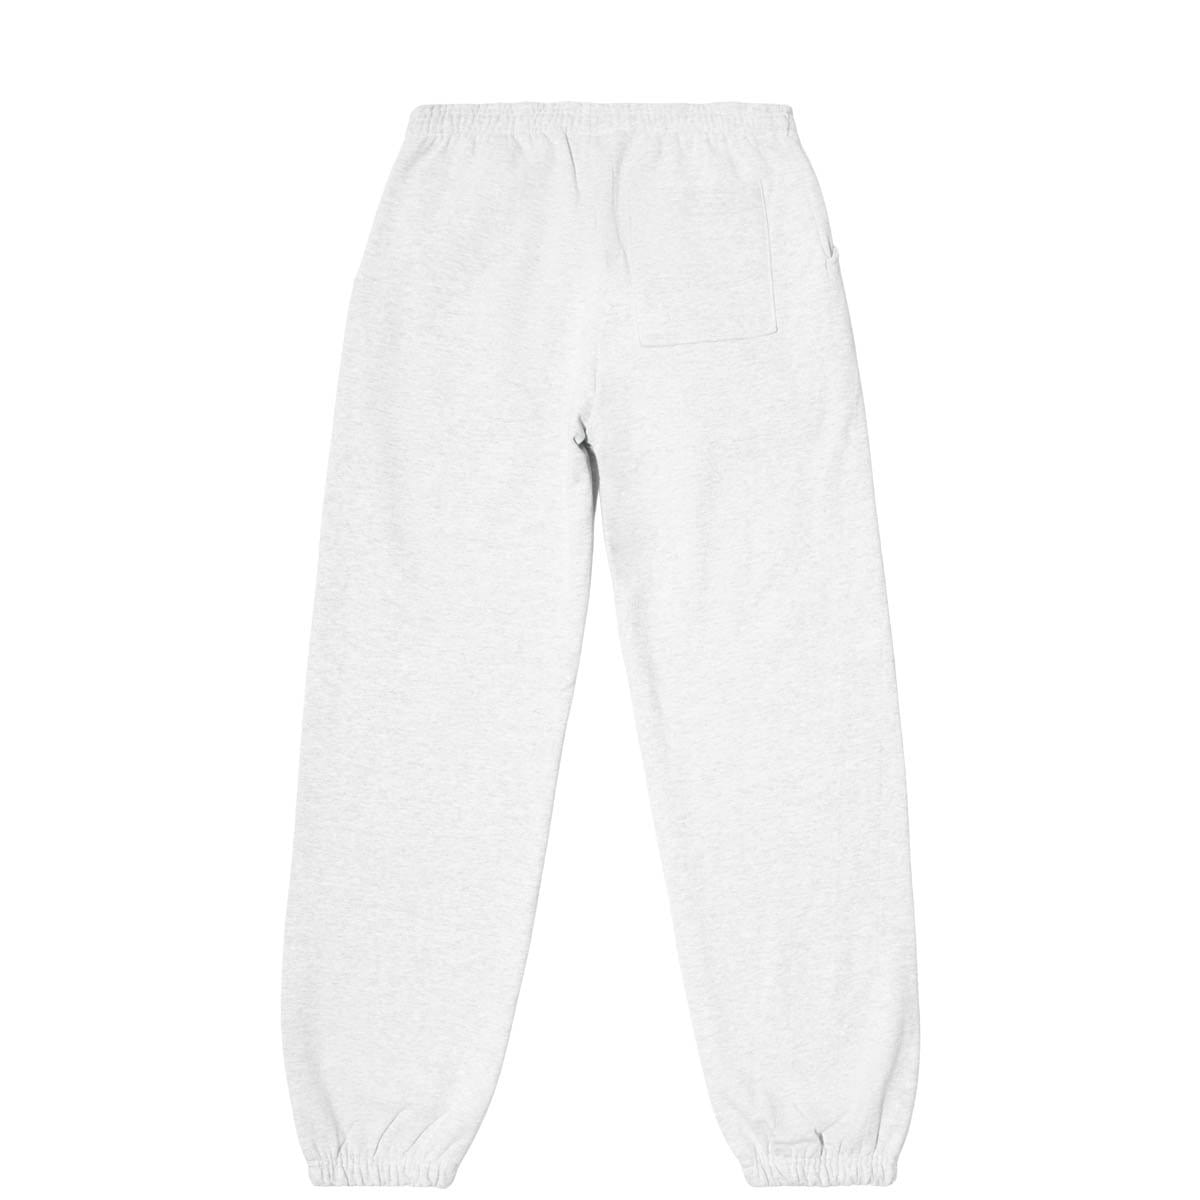 Bricks & Wood Bottoms FOR DAILY USE SWEATPANTS